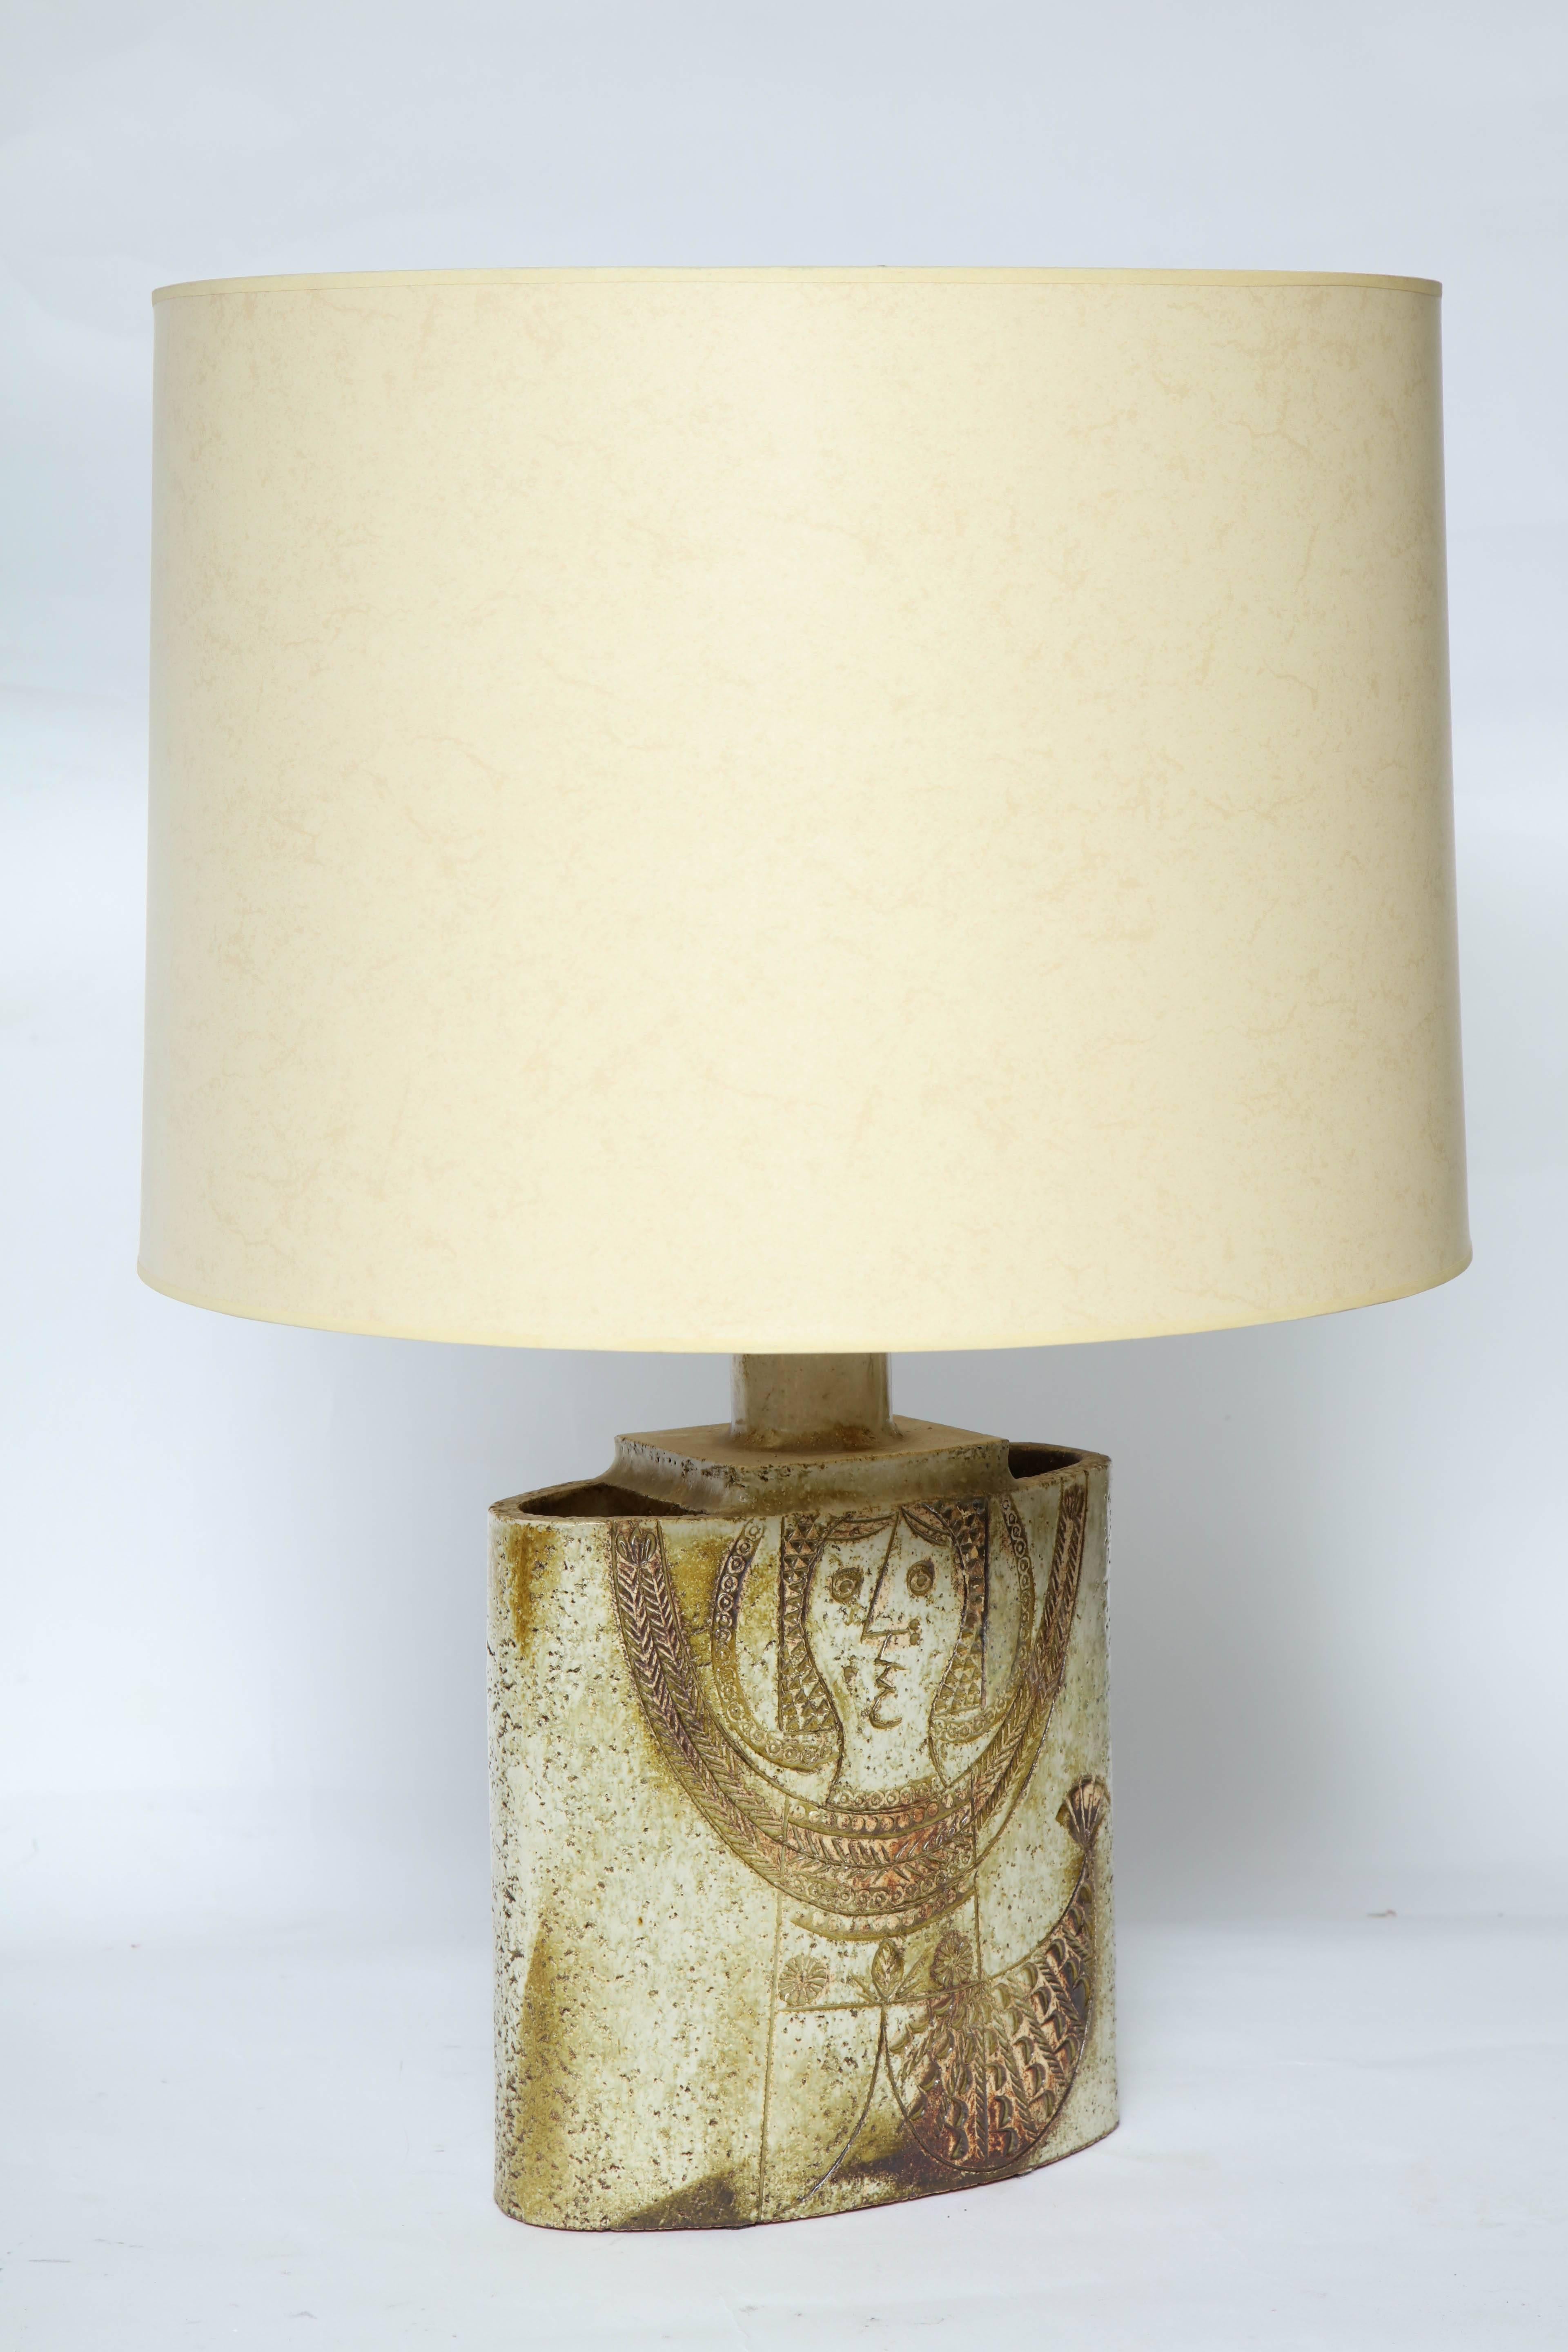 French Mid-Century Modern Ceramic Table Lamp signed Capron Valauris Paris France